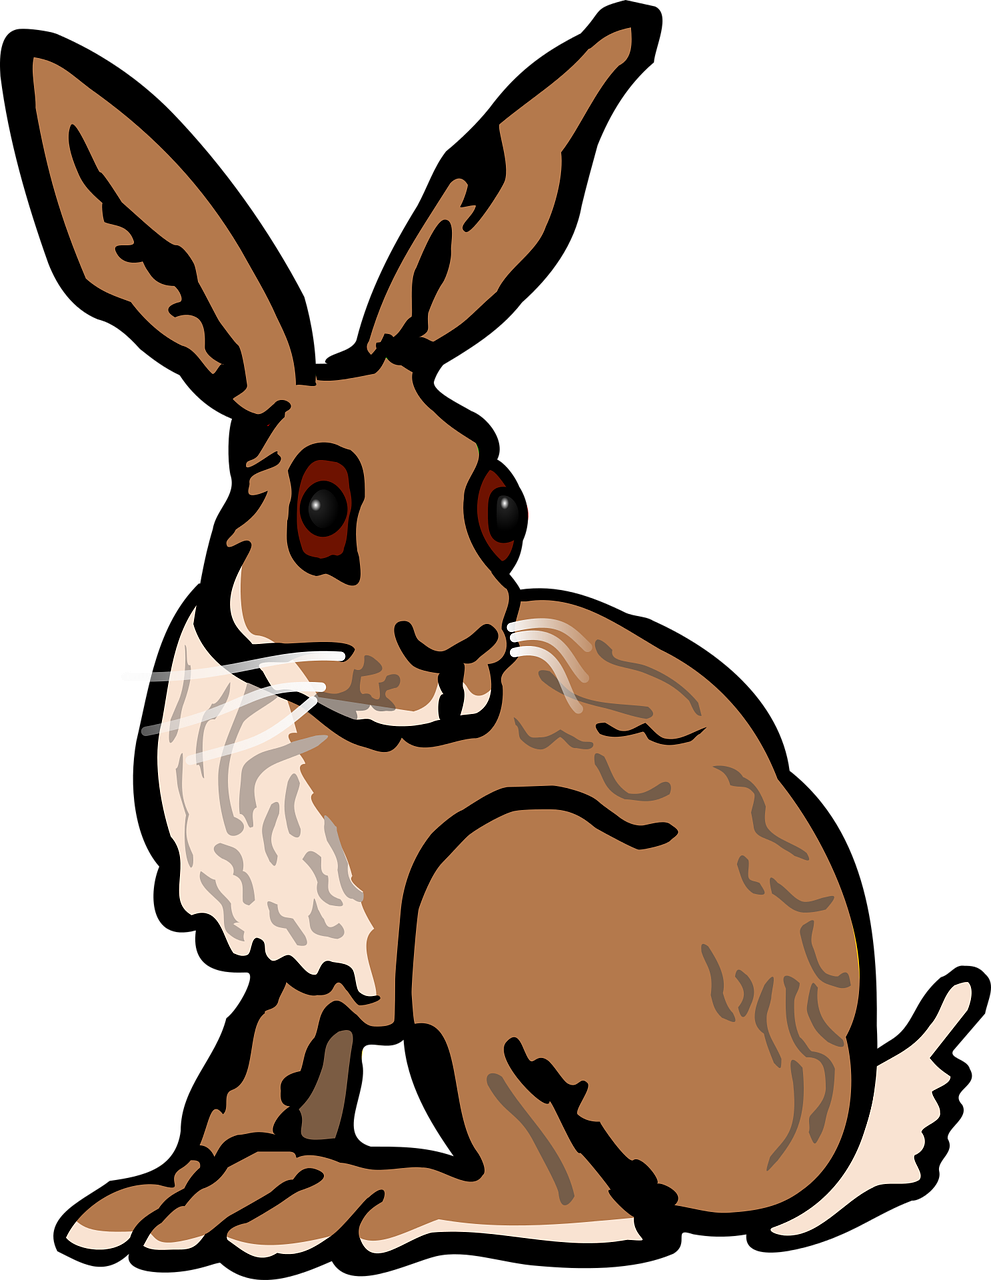 a close up of a rabbit on a black background, an illustration of, inspired by George Cruikshank, wikihow illustration, computer generated, raptor, full color illustration